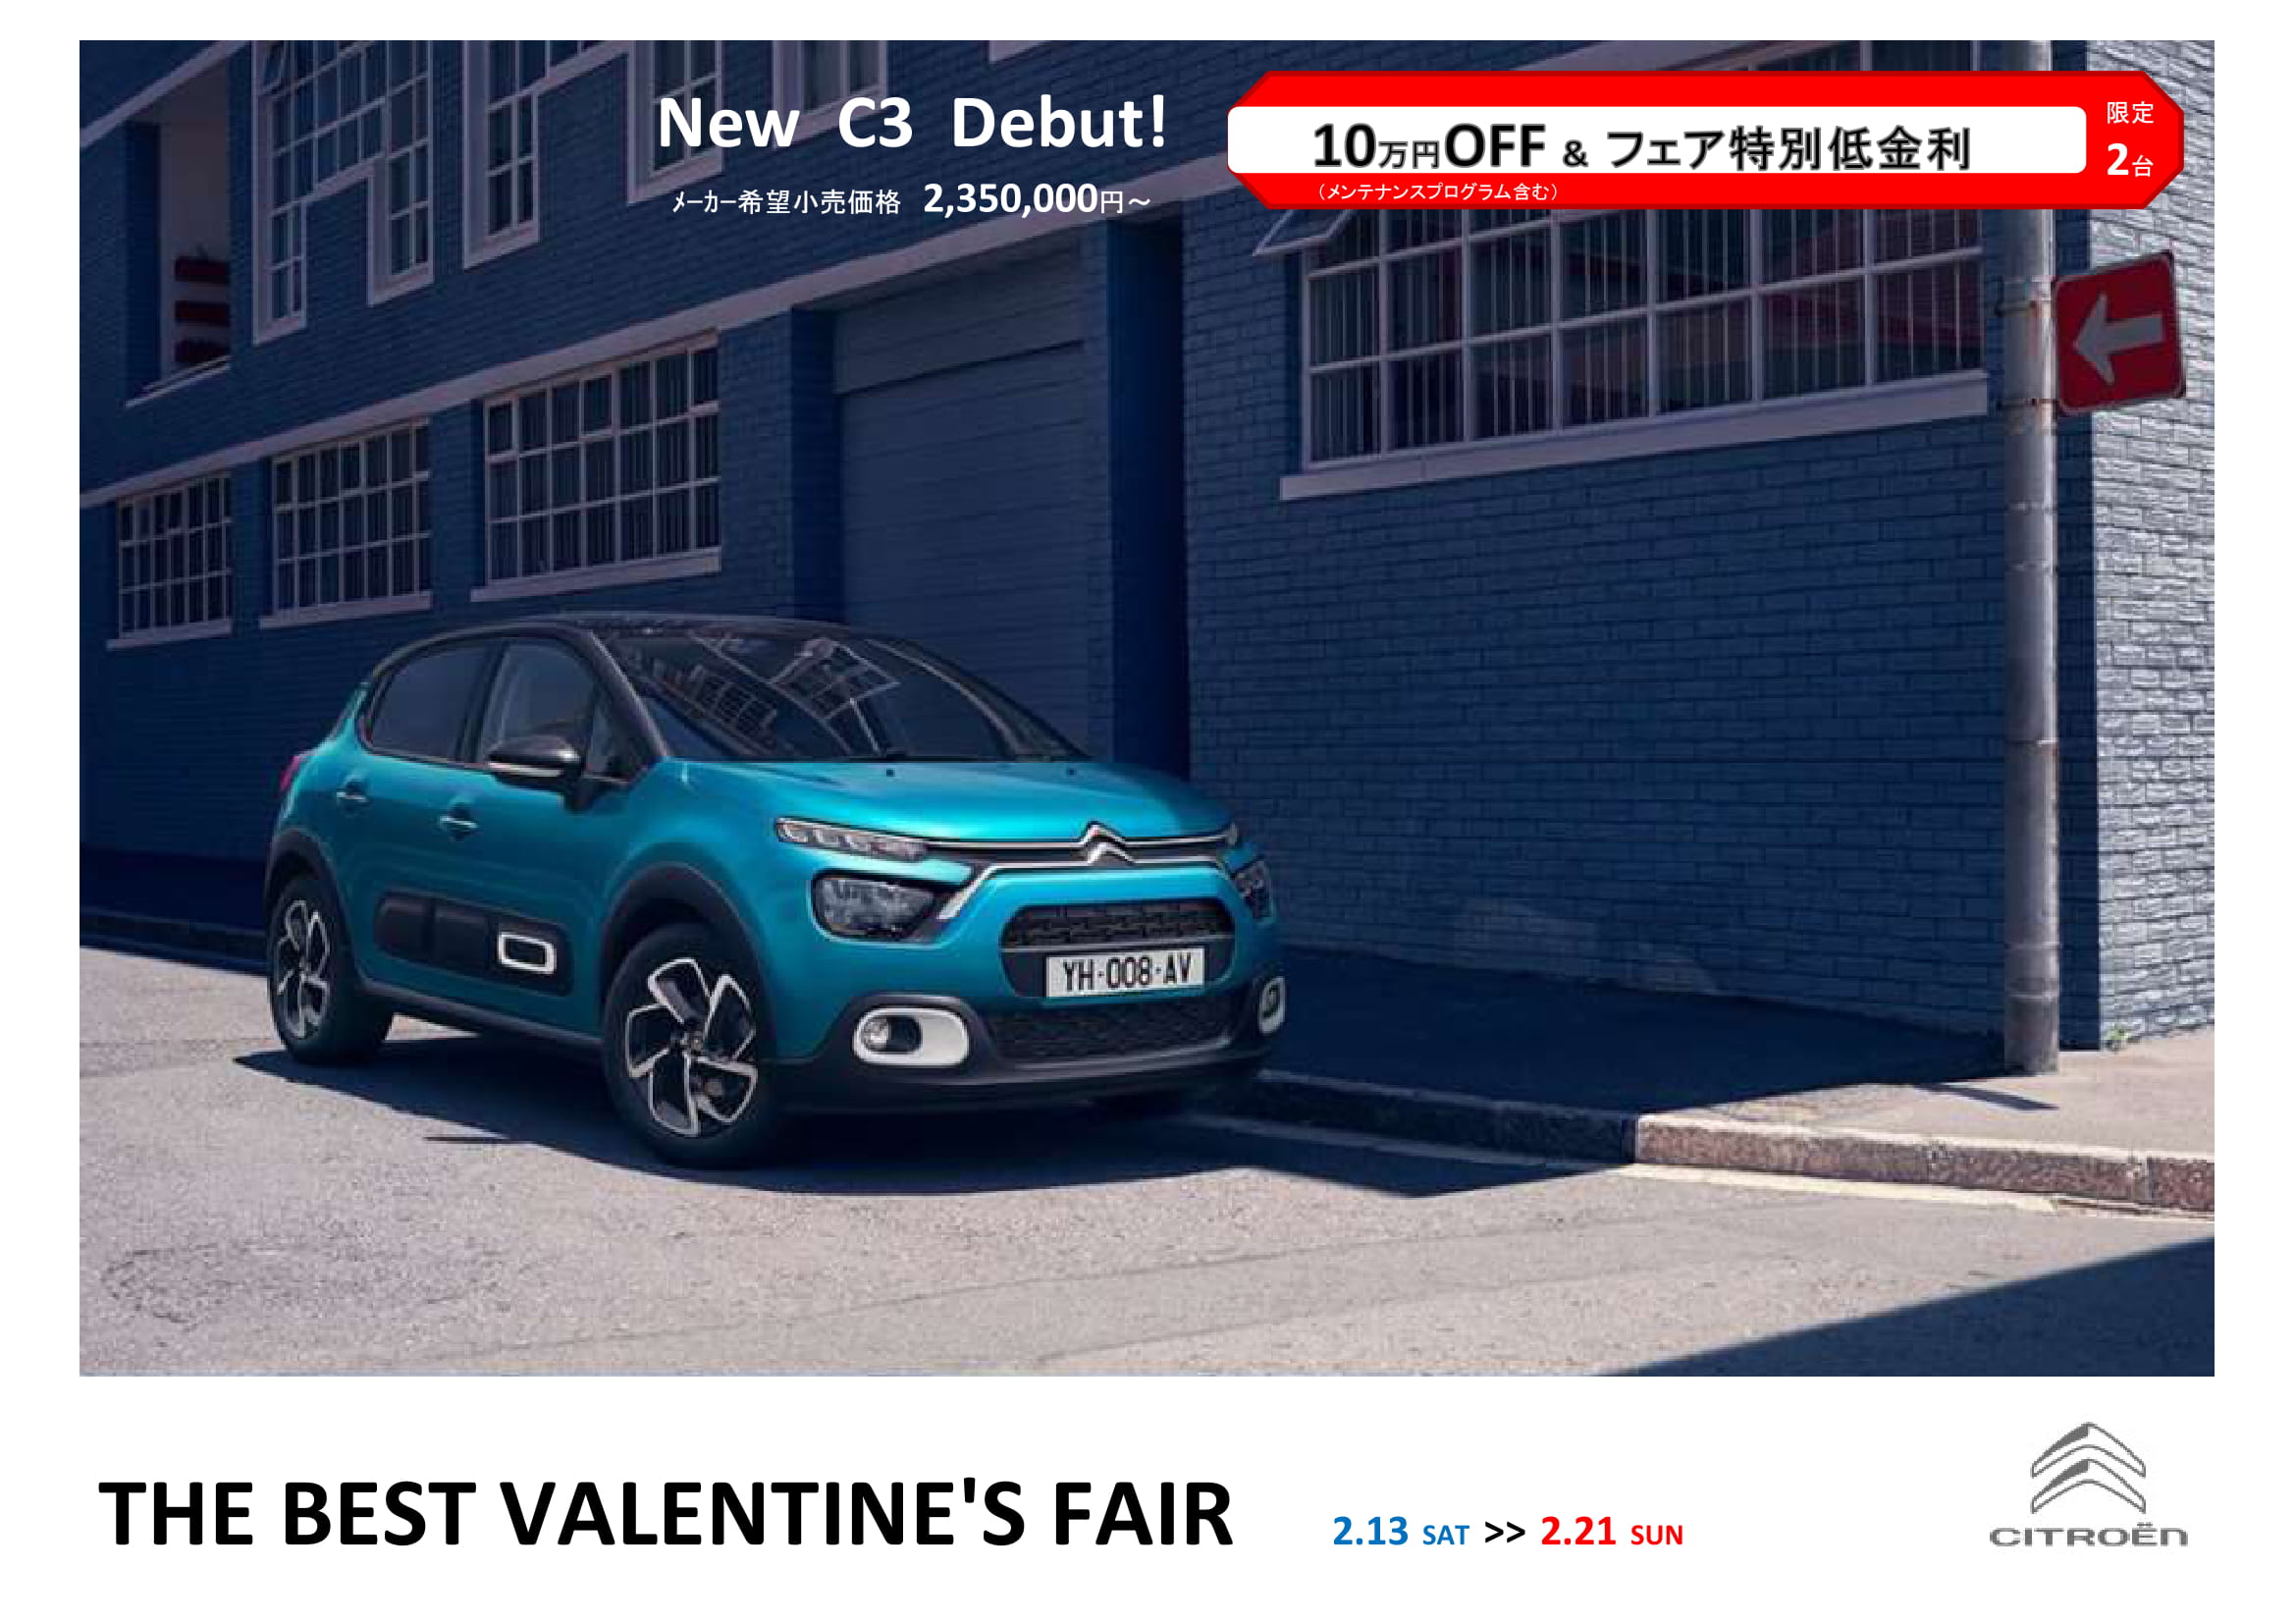 THE BEST VALENTINT'S FAIR開催中です